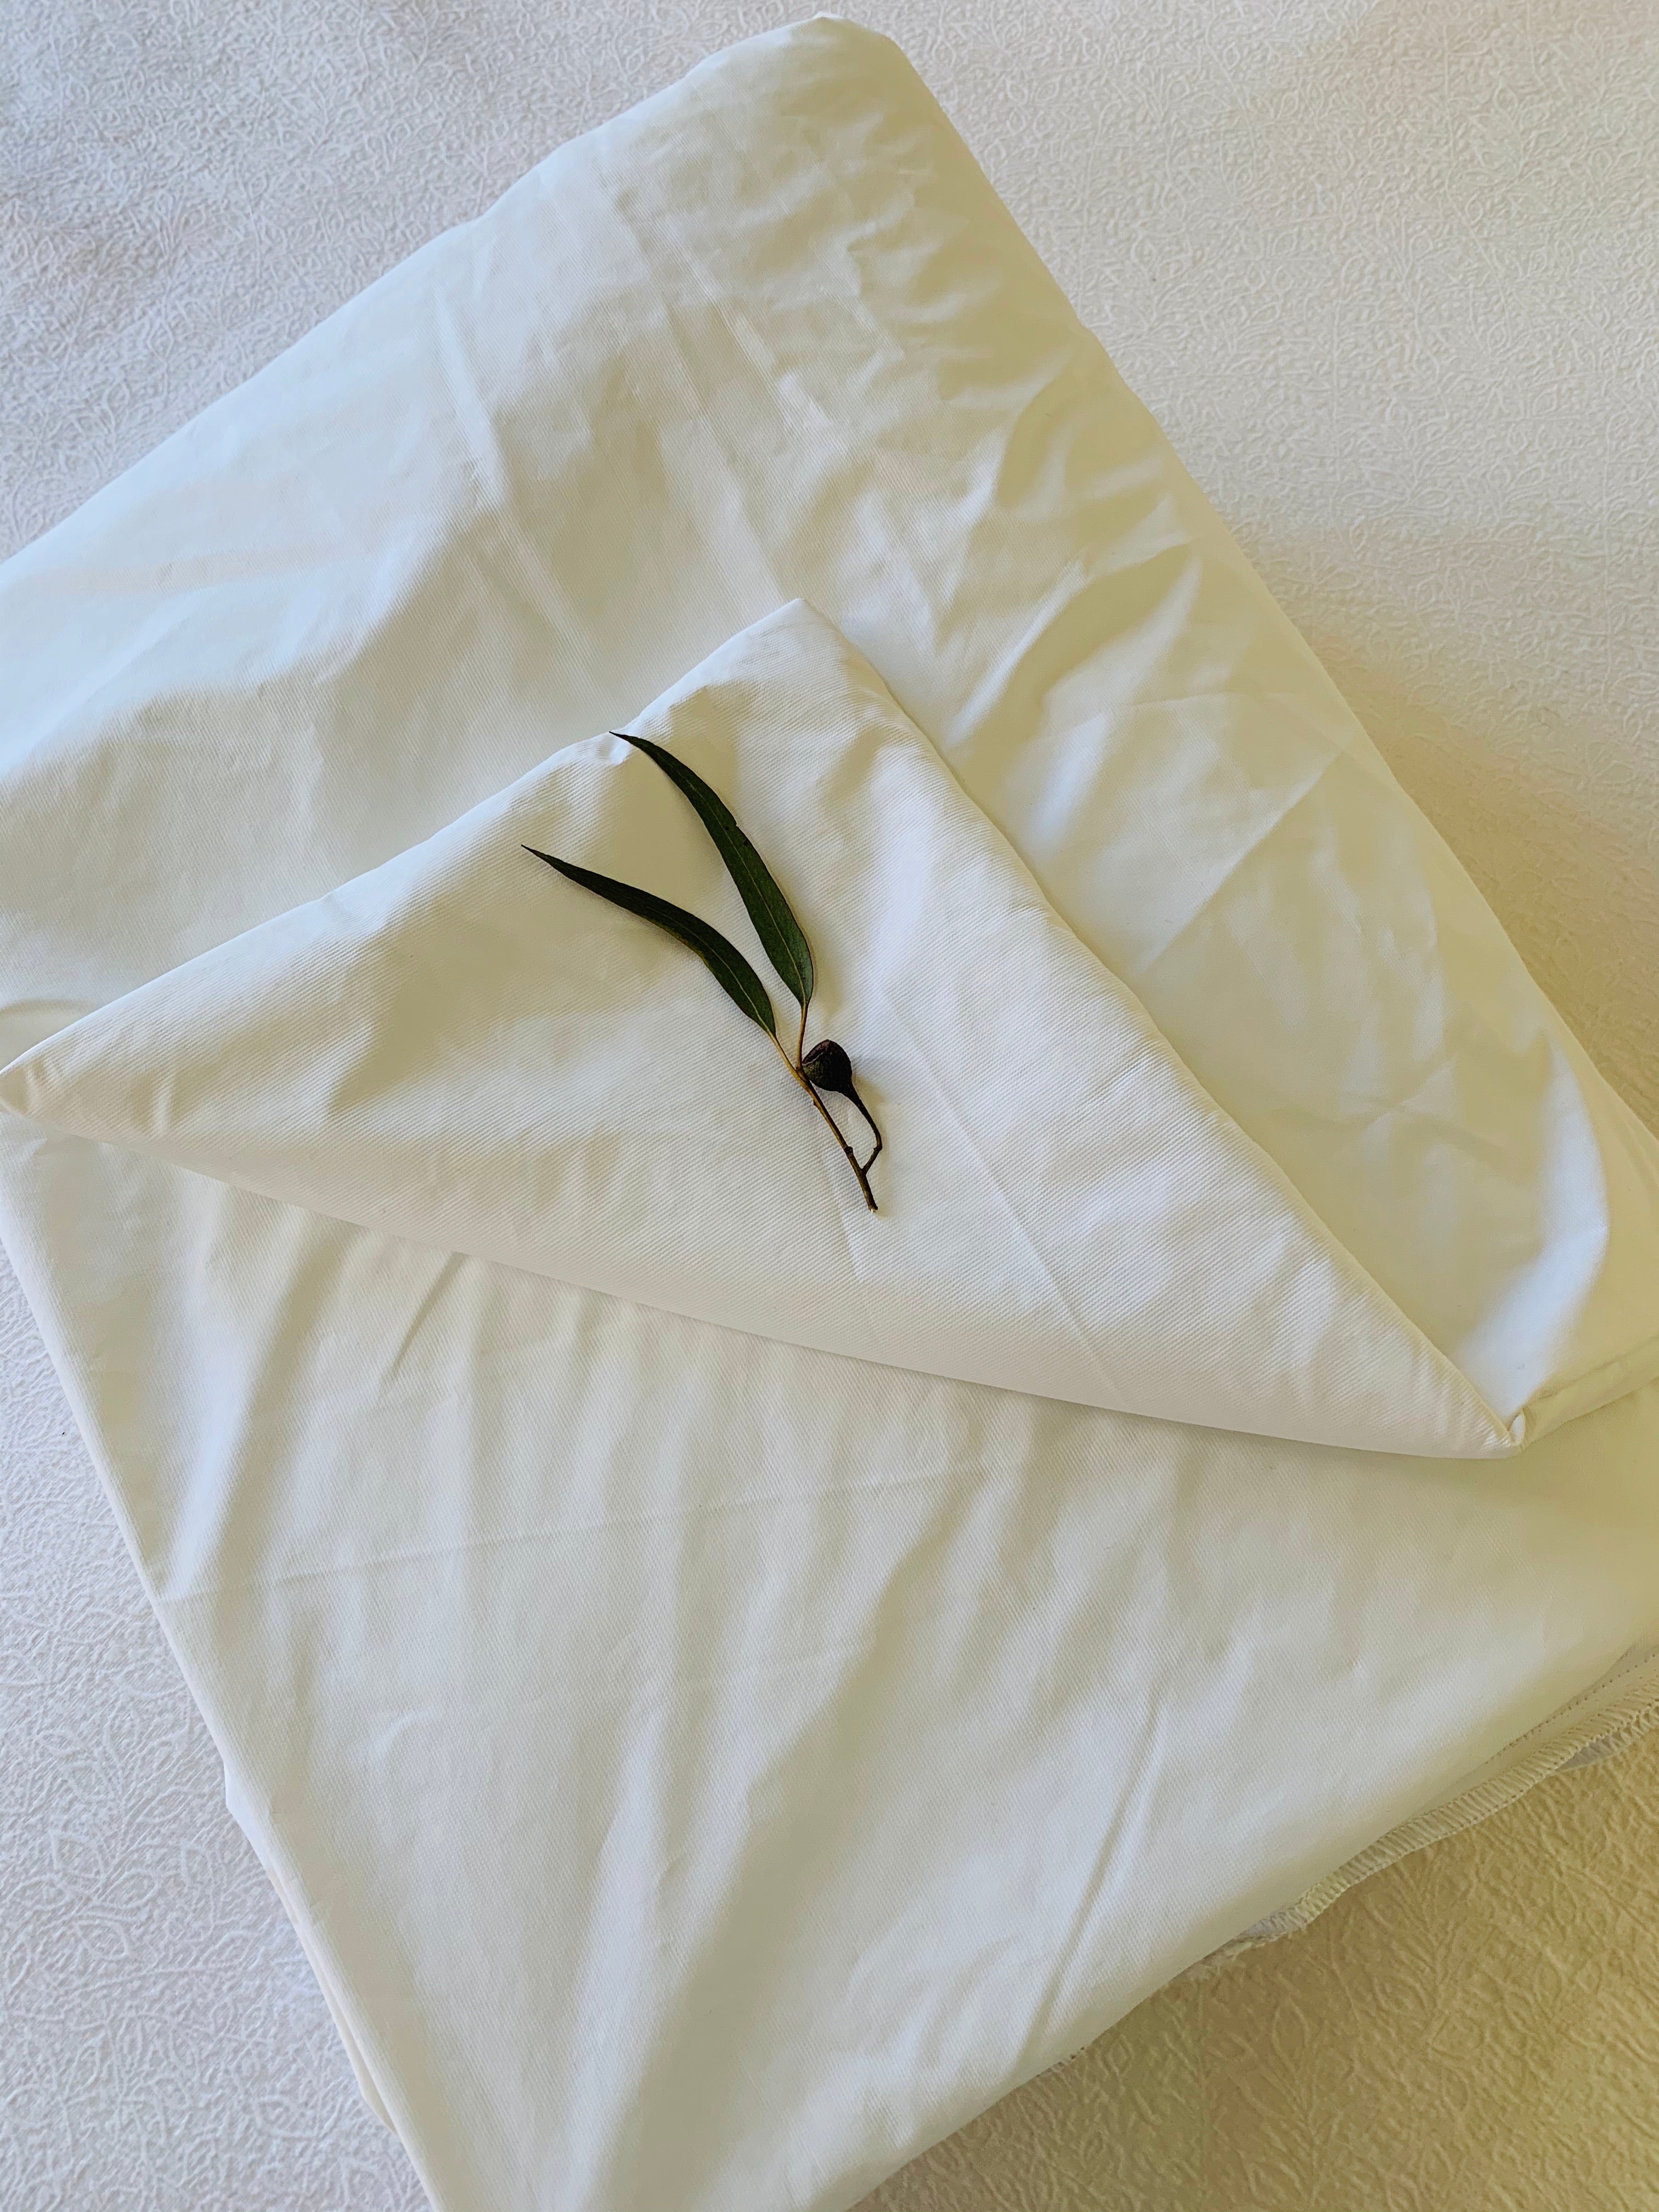 A white quilt that has been folded and has Australian gumtrees leaves and nuts resting on top.